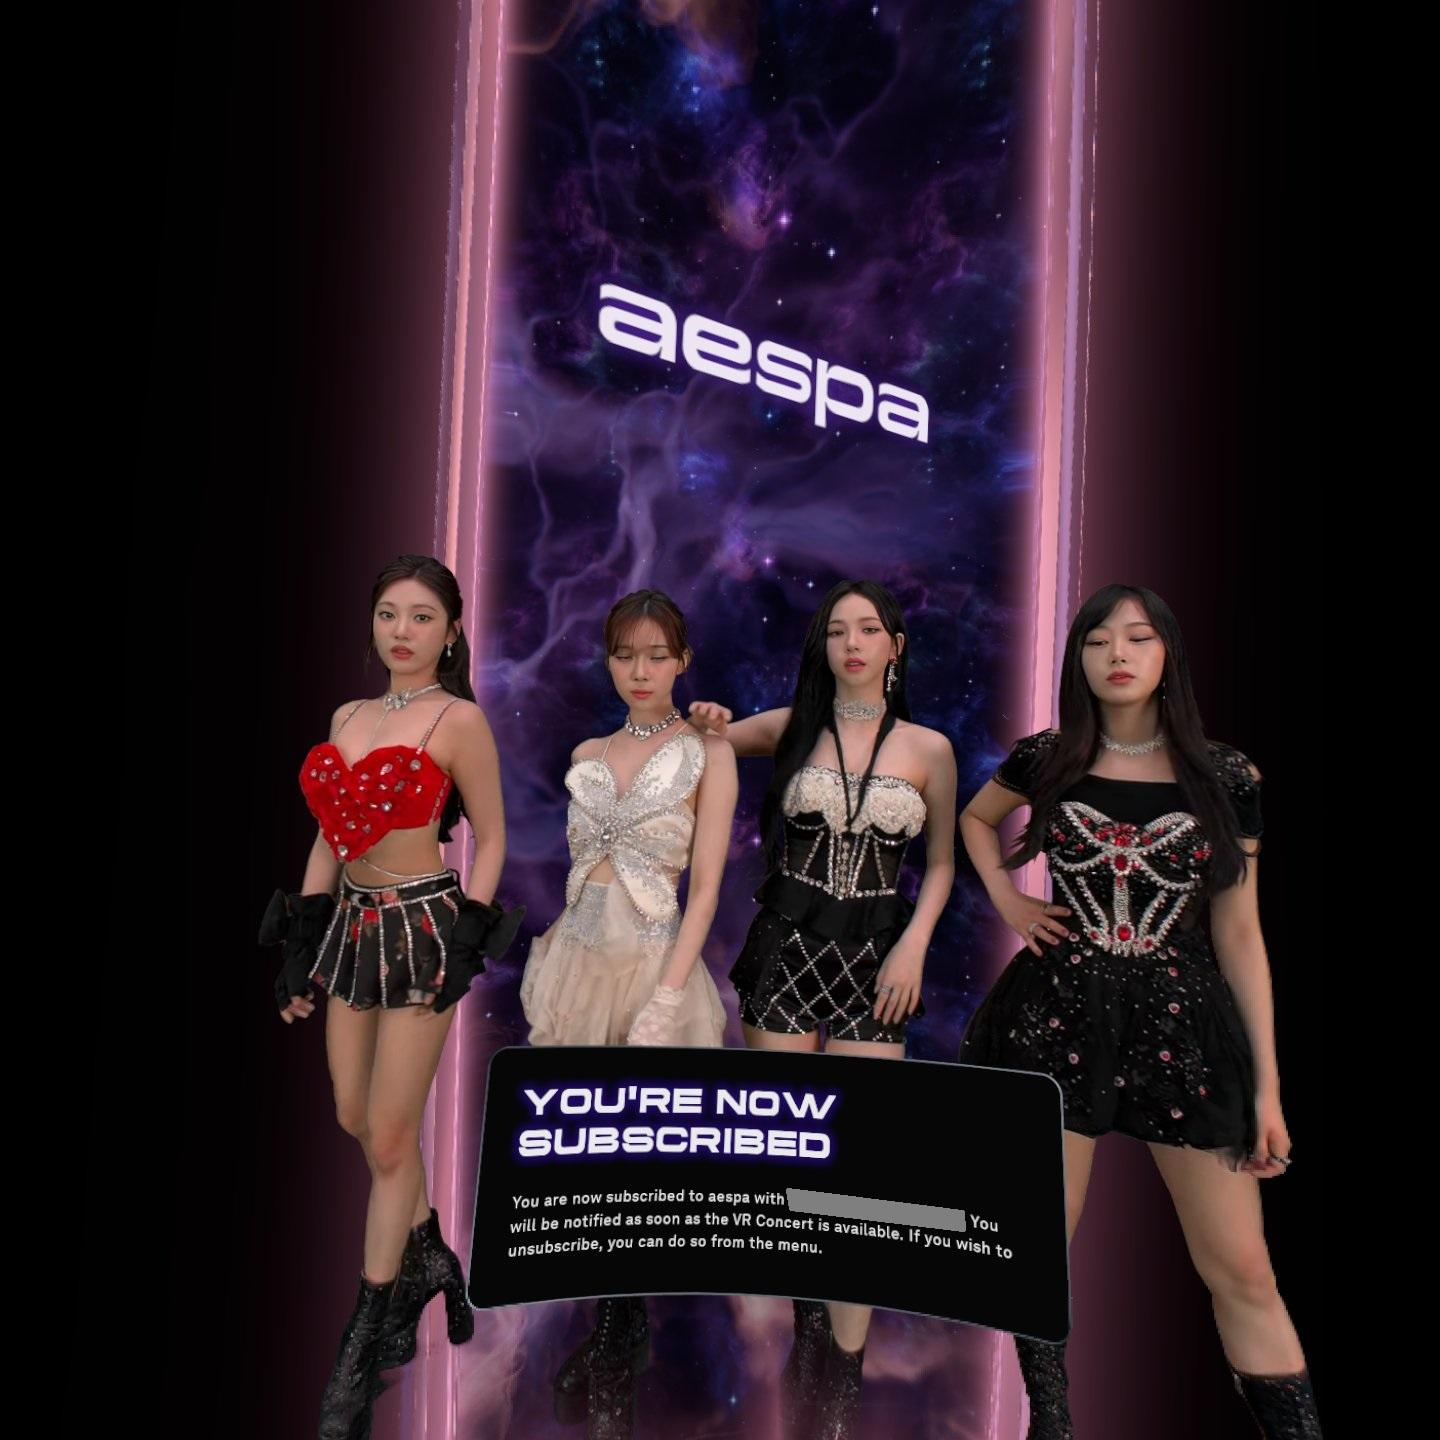 Aespa VR concert listed as coming soon in AmazeVR app